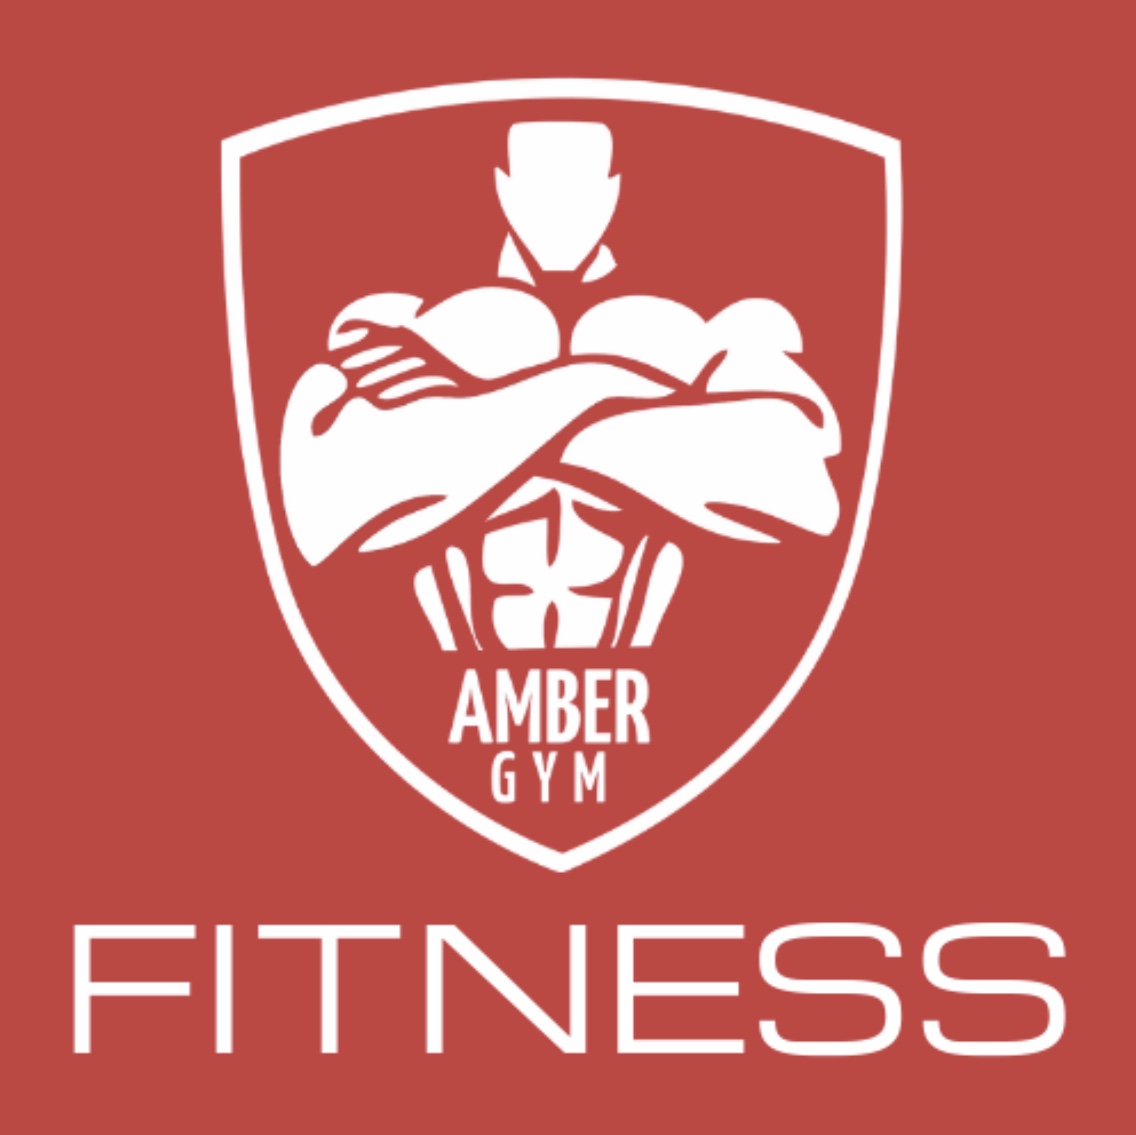 Amber Gym Fitness profile picture